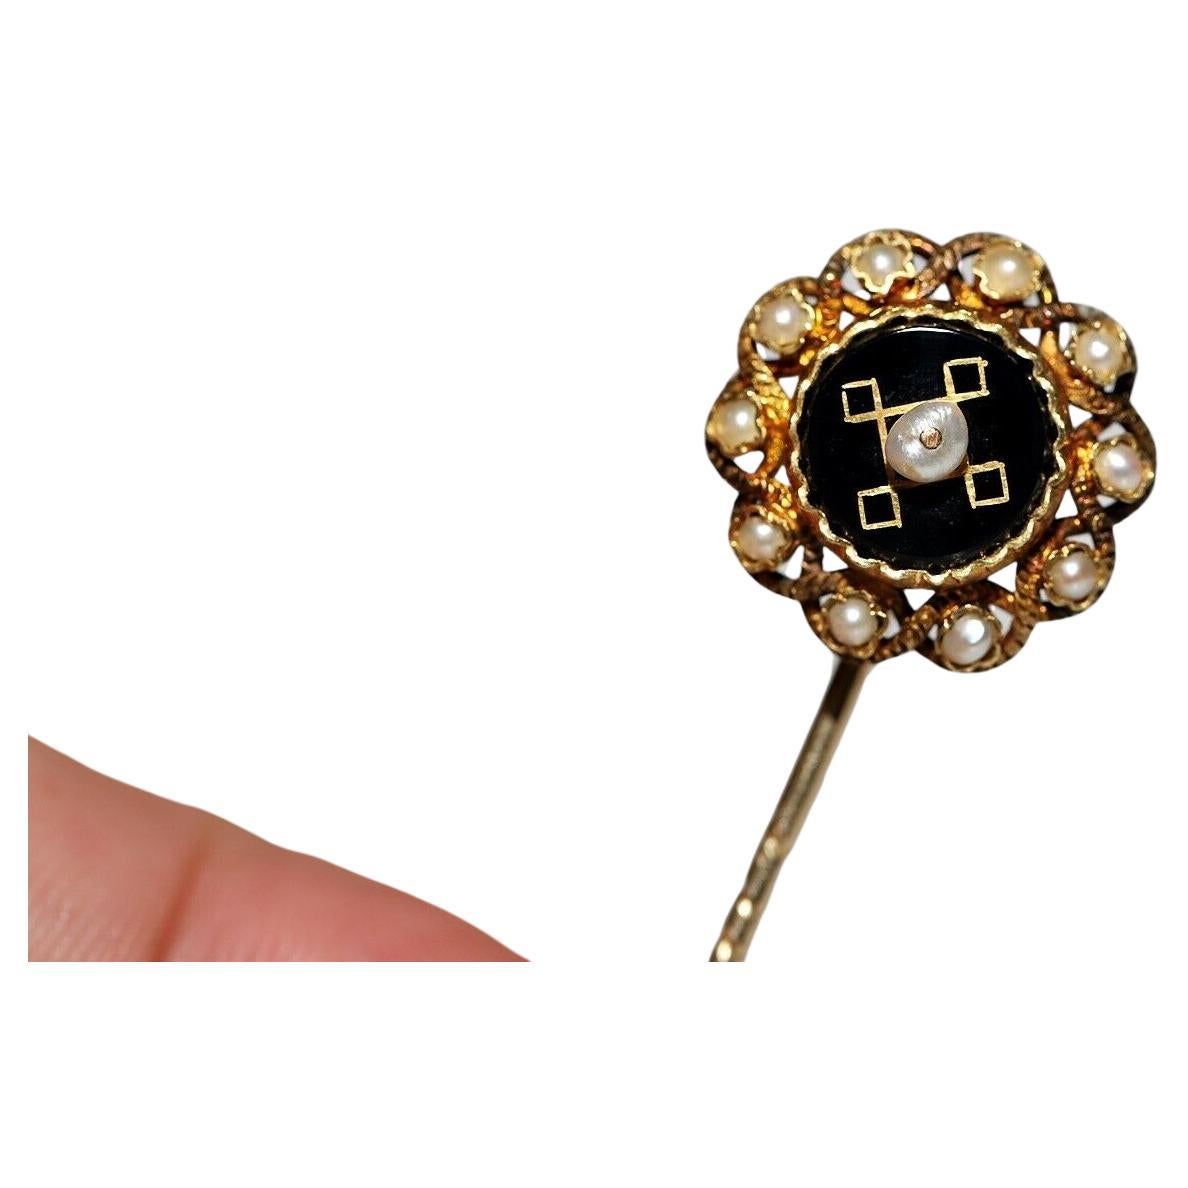  Antique Original Circa 1900s 14k Gold Natural Pearl And Onyx Decorated Brooch For Sale